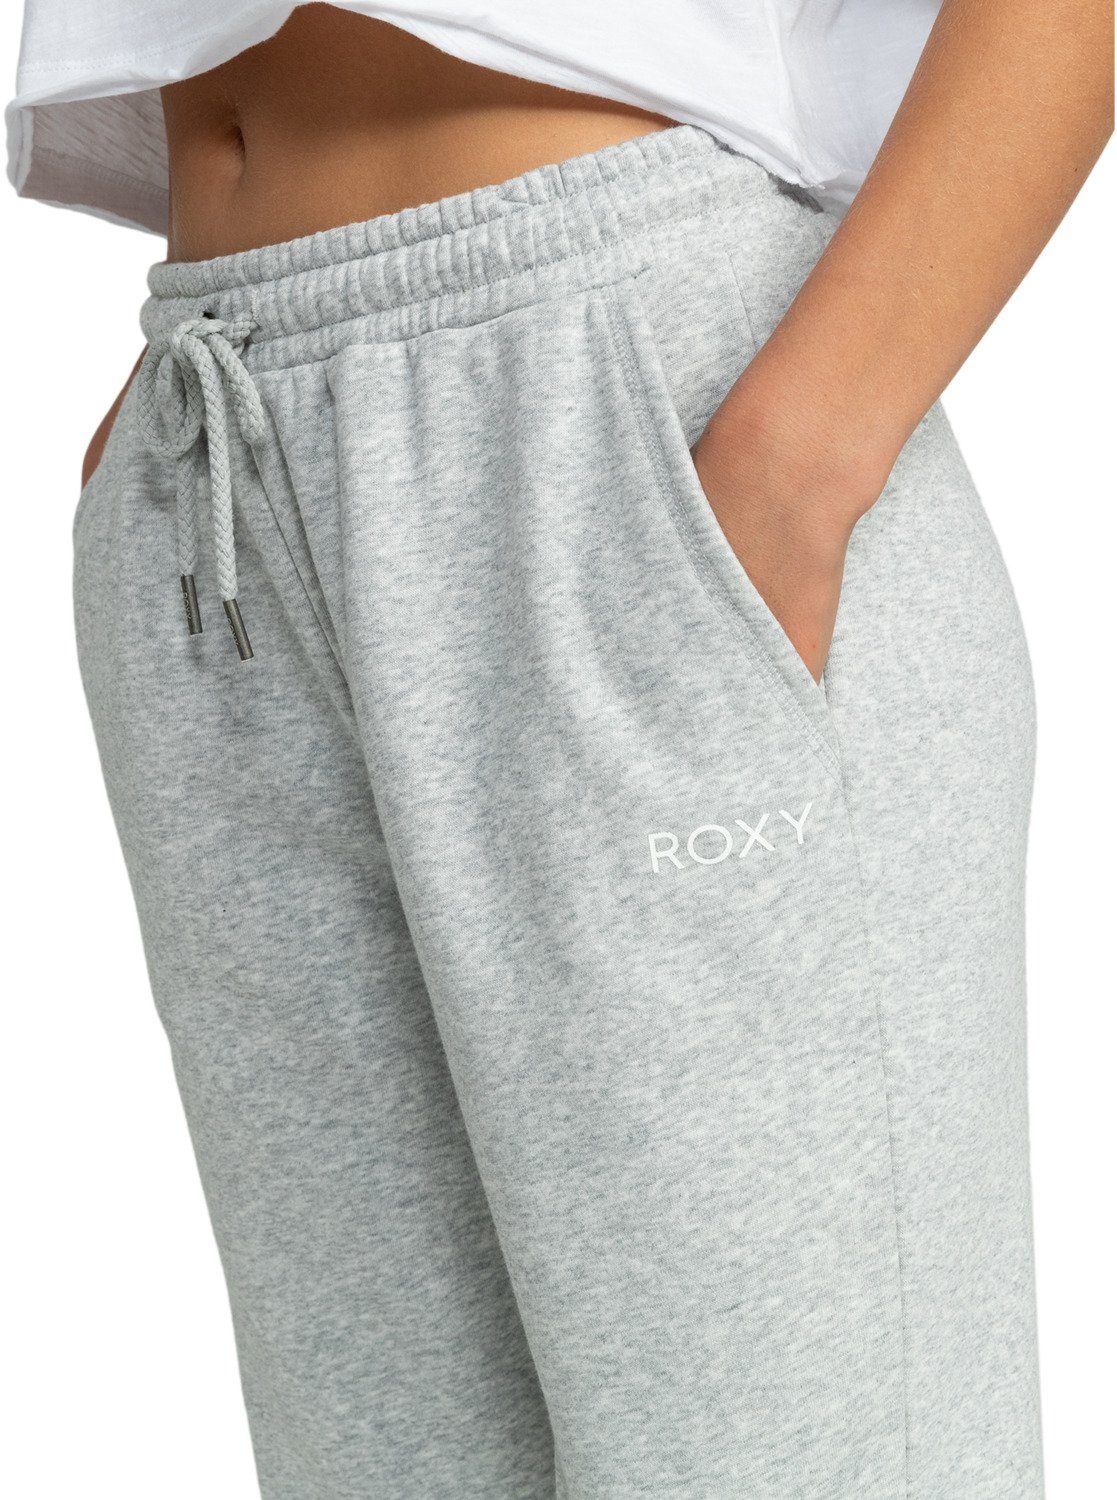 Roxy Jogpants From Home